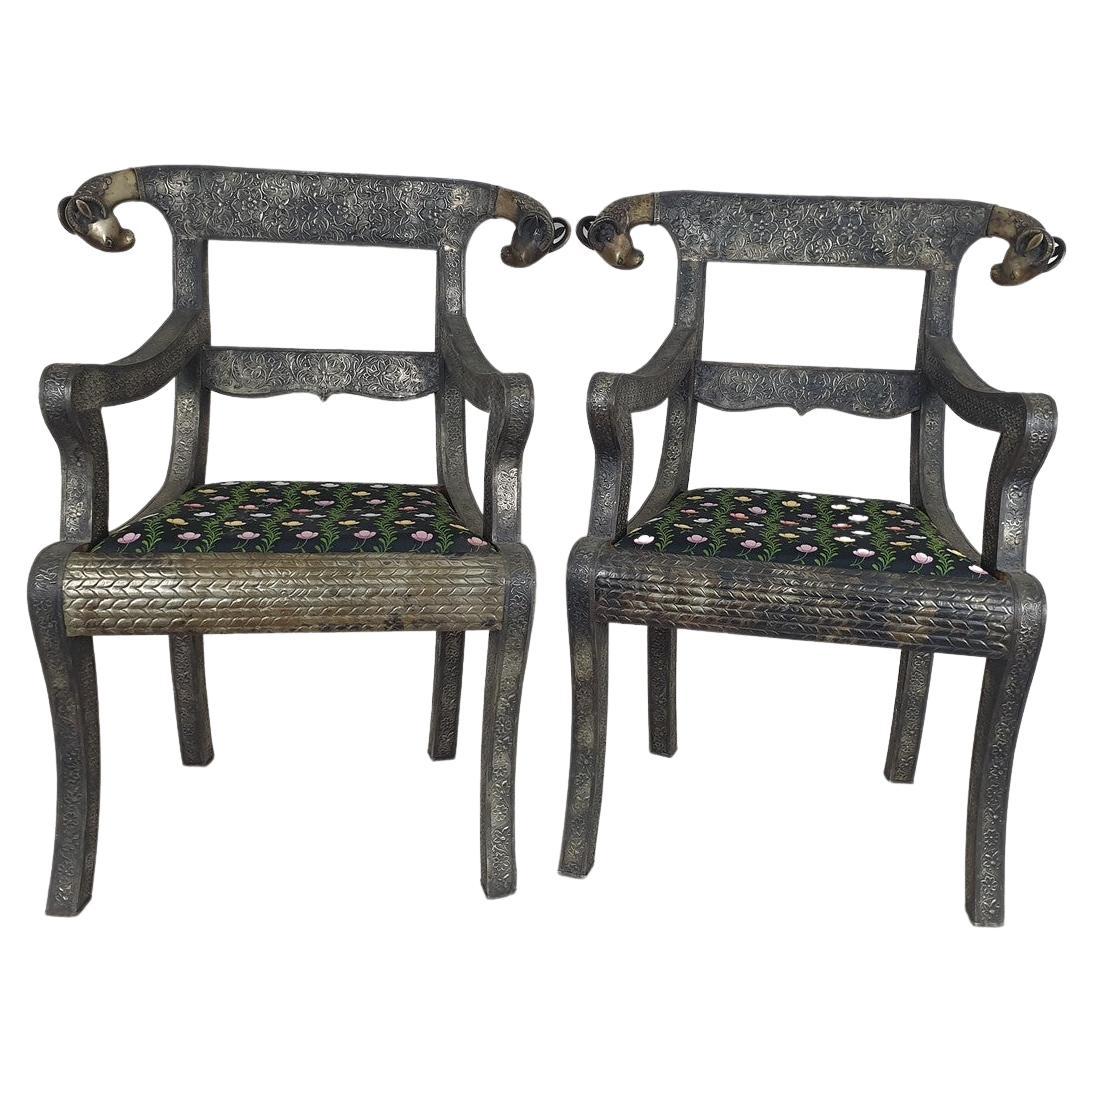 Pair of Metal Armchairs, India, Early 20th Century